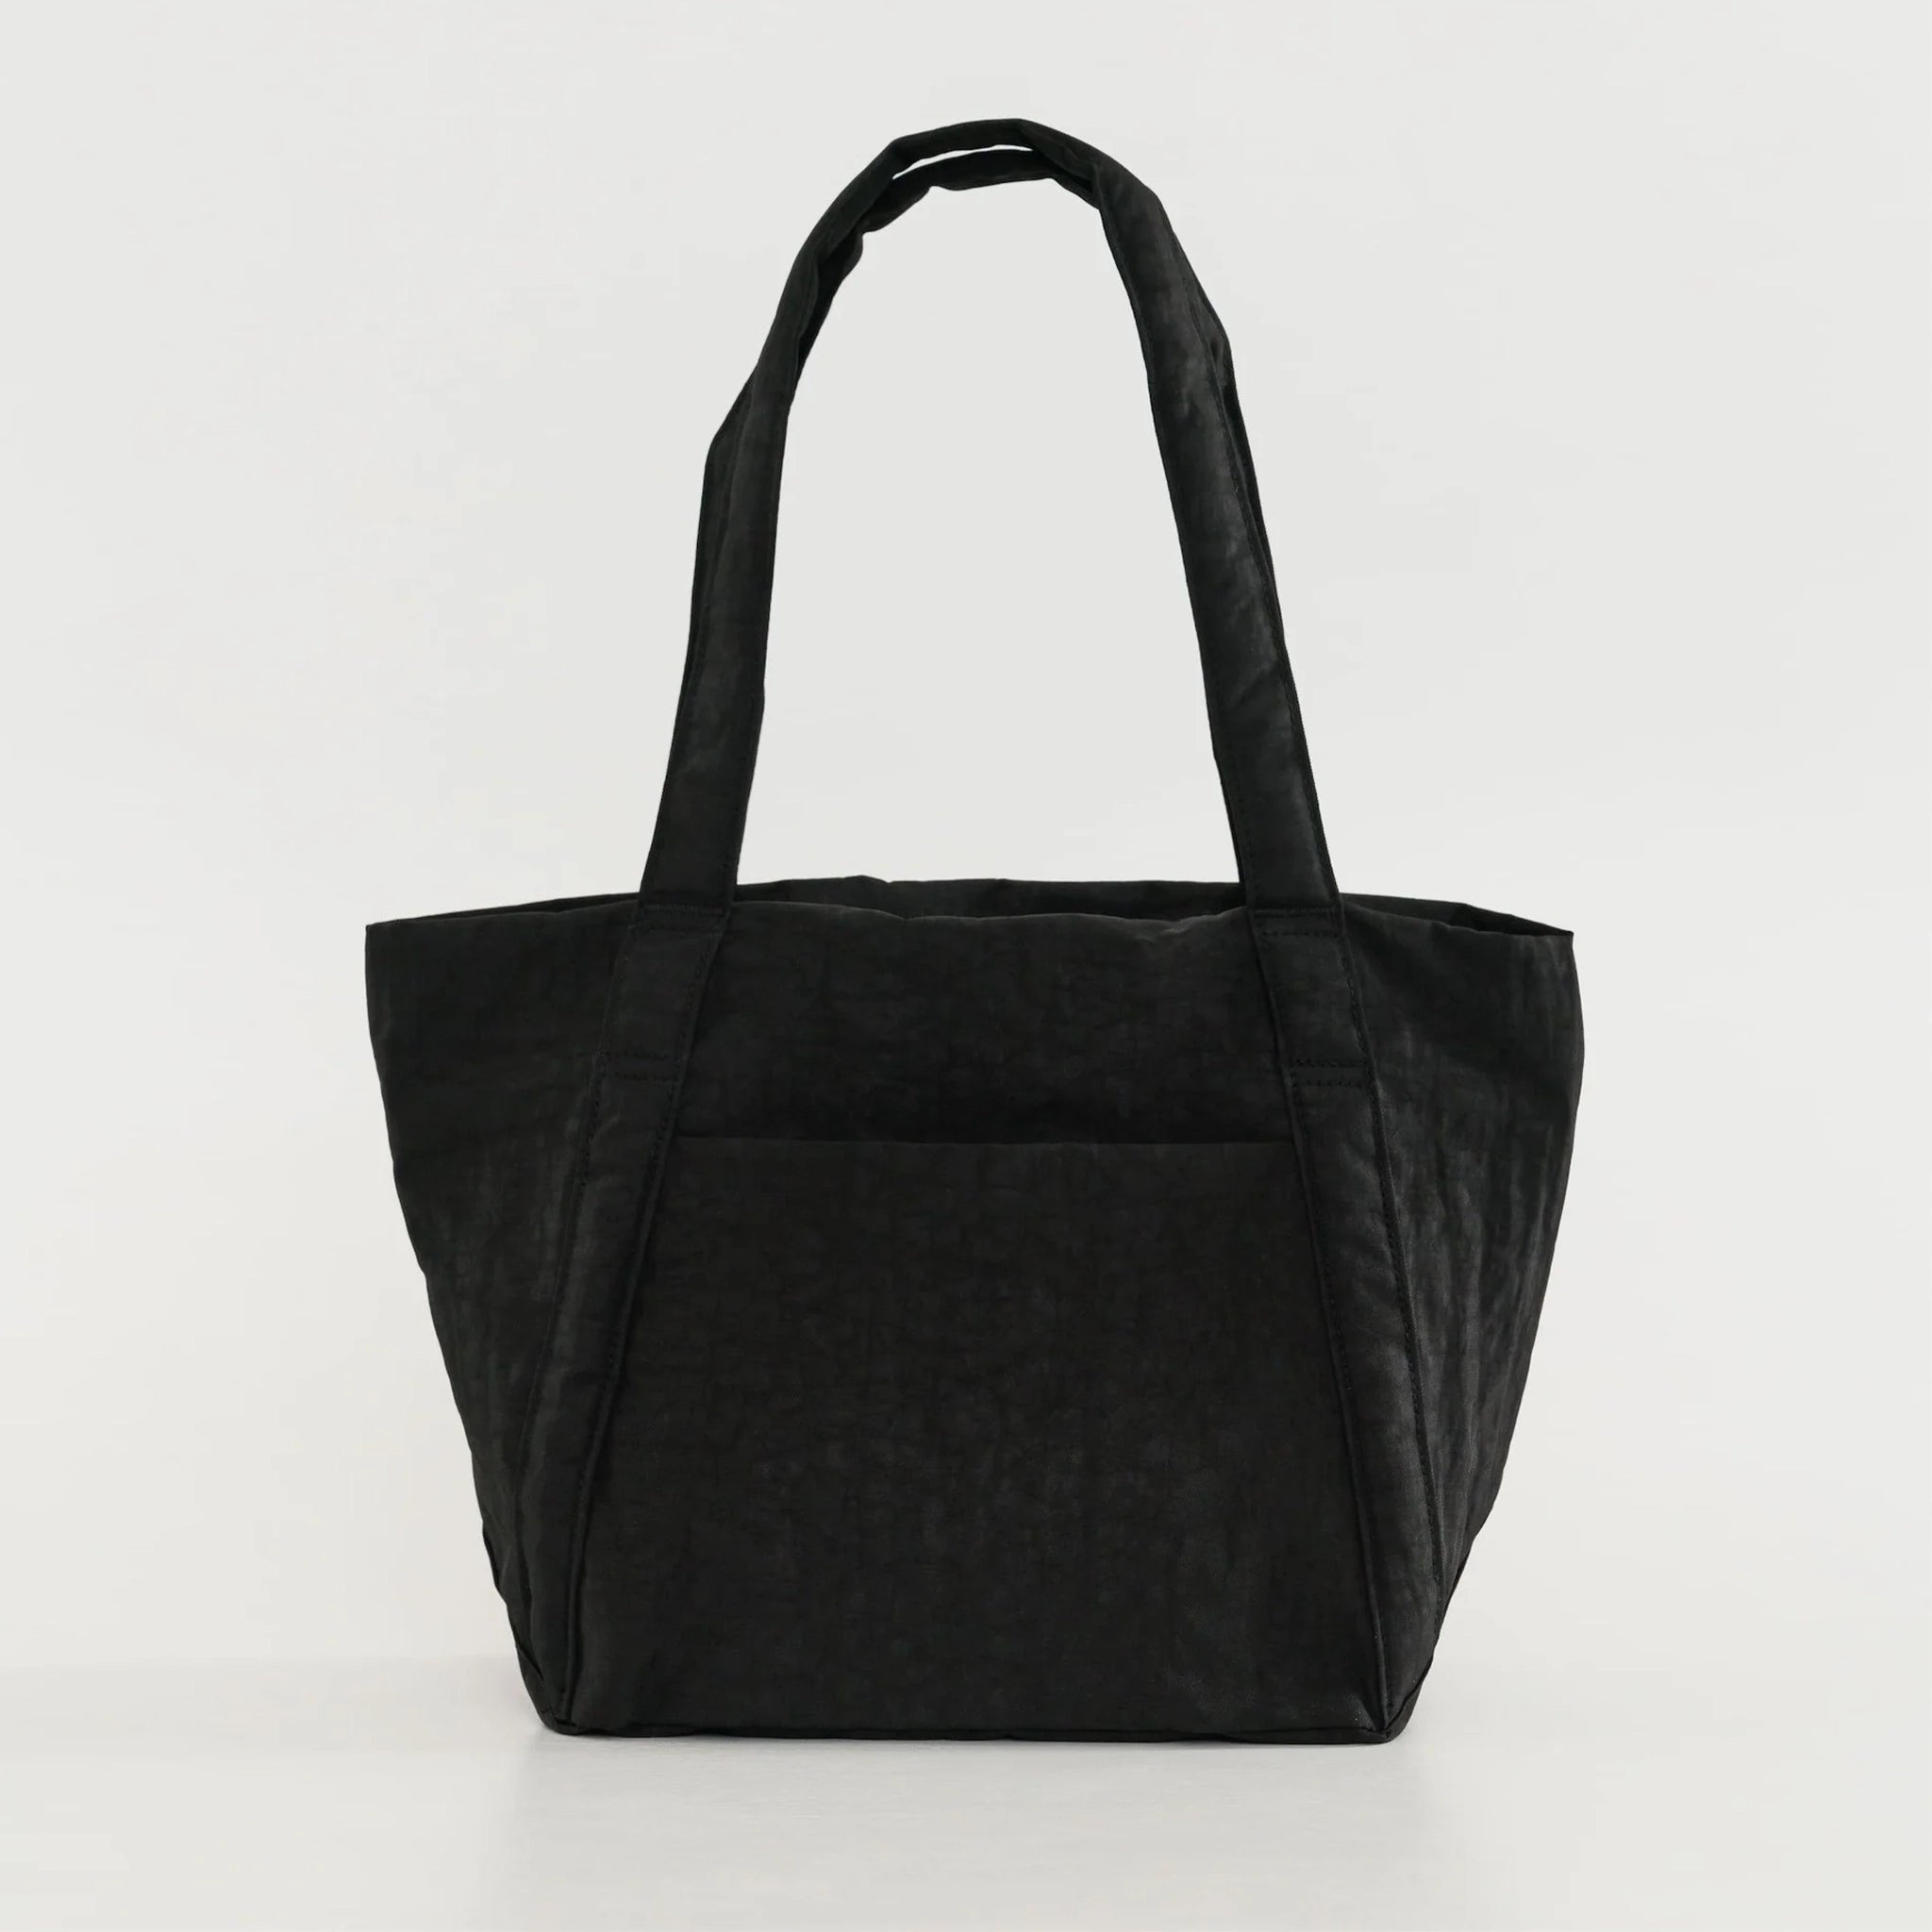 On a white background is a the Mini Cloud Bag in the shade black. It is a rectangular shaped puffy bag with shoulder straps and a wide opening.